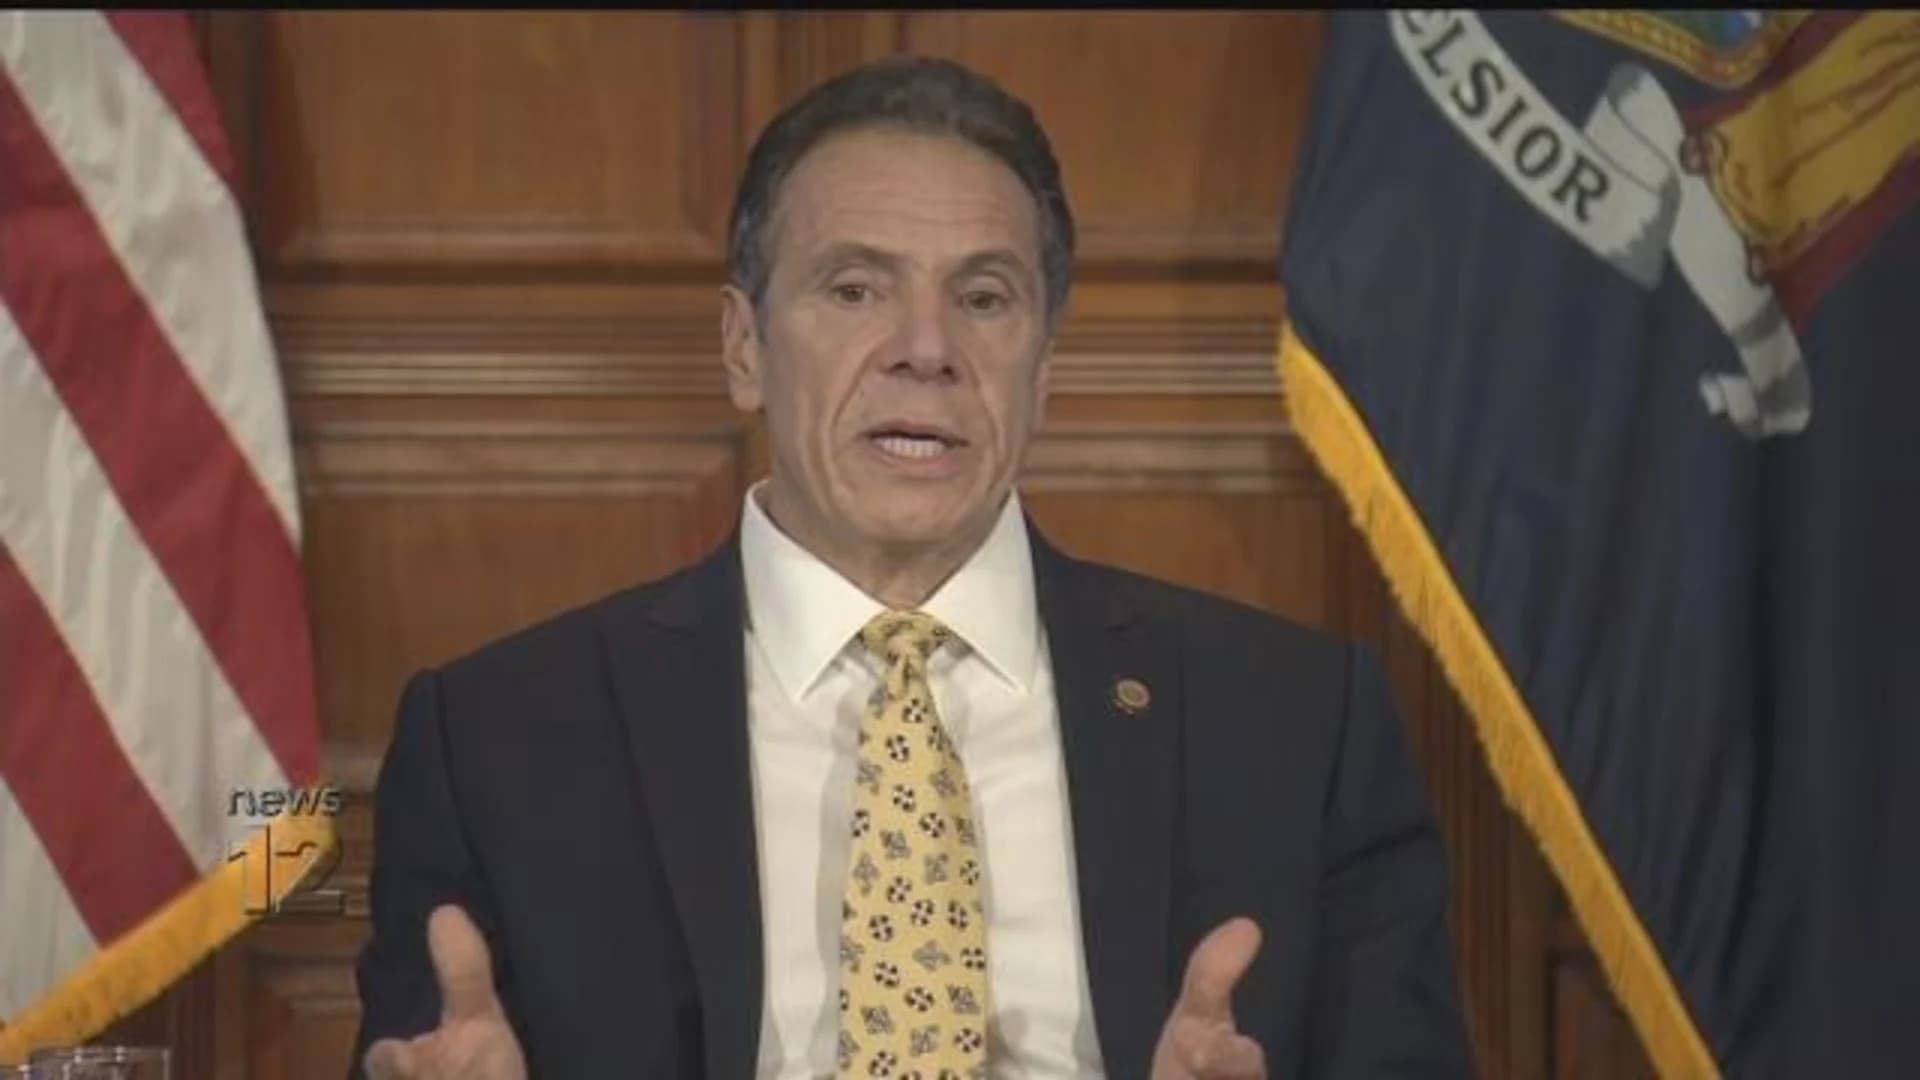 Gov. Cuomo: Projection shows apex of COVID-19 hospitalizations is starting to plateau